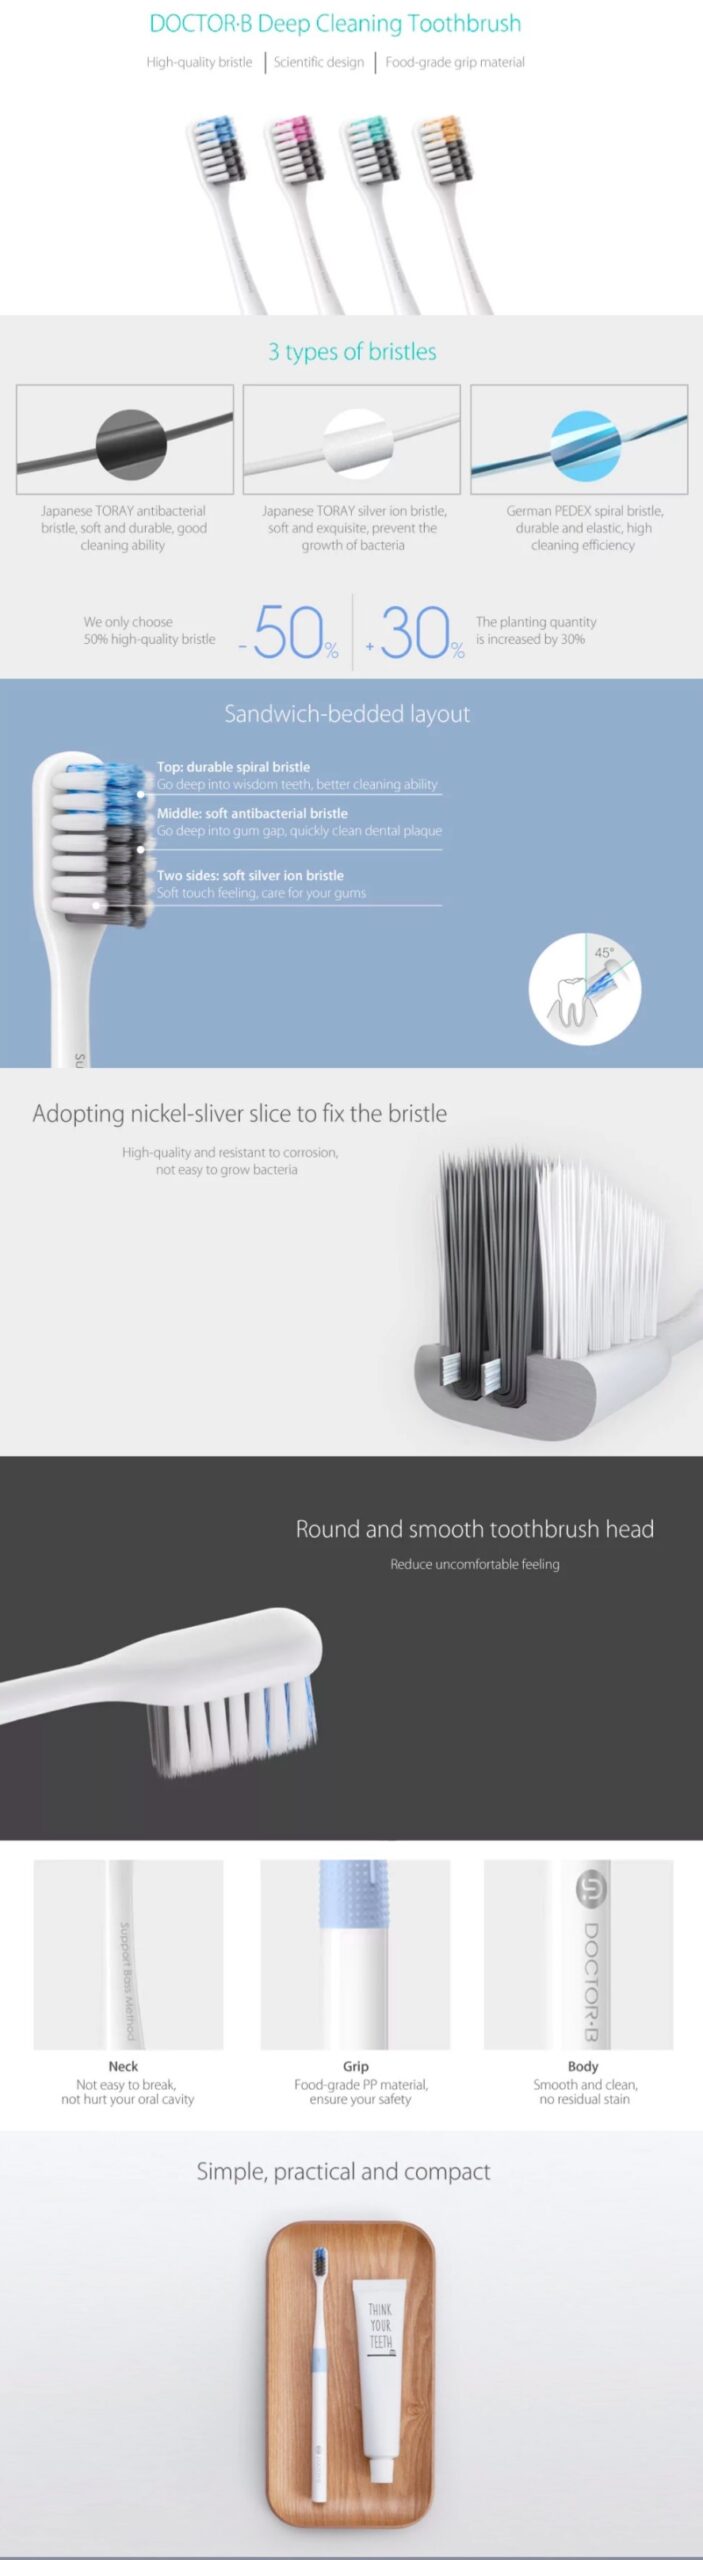 Xiaomi Doctor Bei Bass Method Toothbrush Award winning minimalist design Three carefully selected filament materials for soft/hard brush 30% higher filament density Bacteria-resistant nickel-silver plate Travel case included